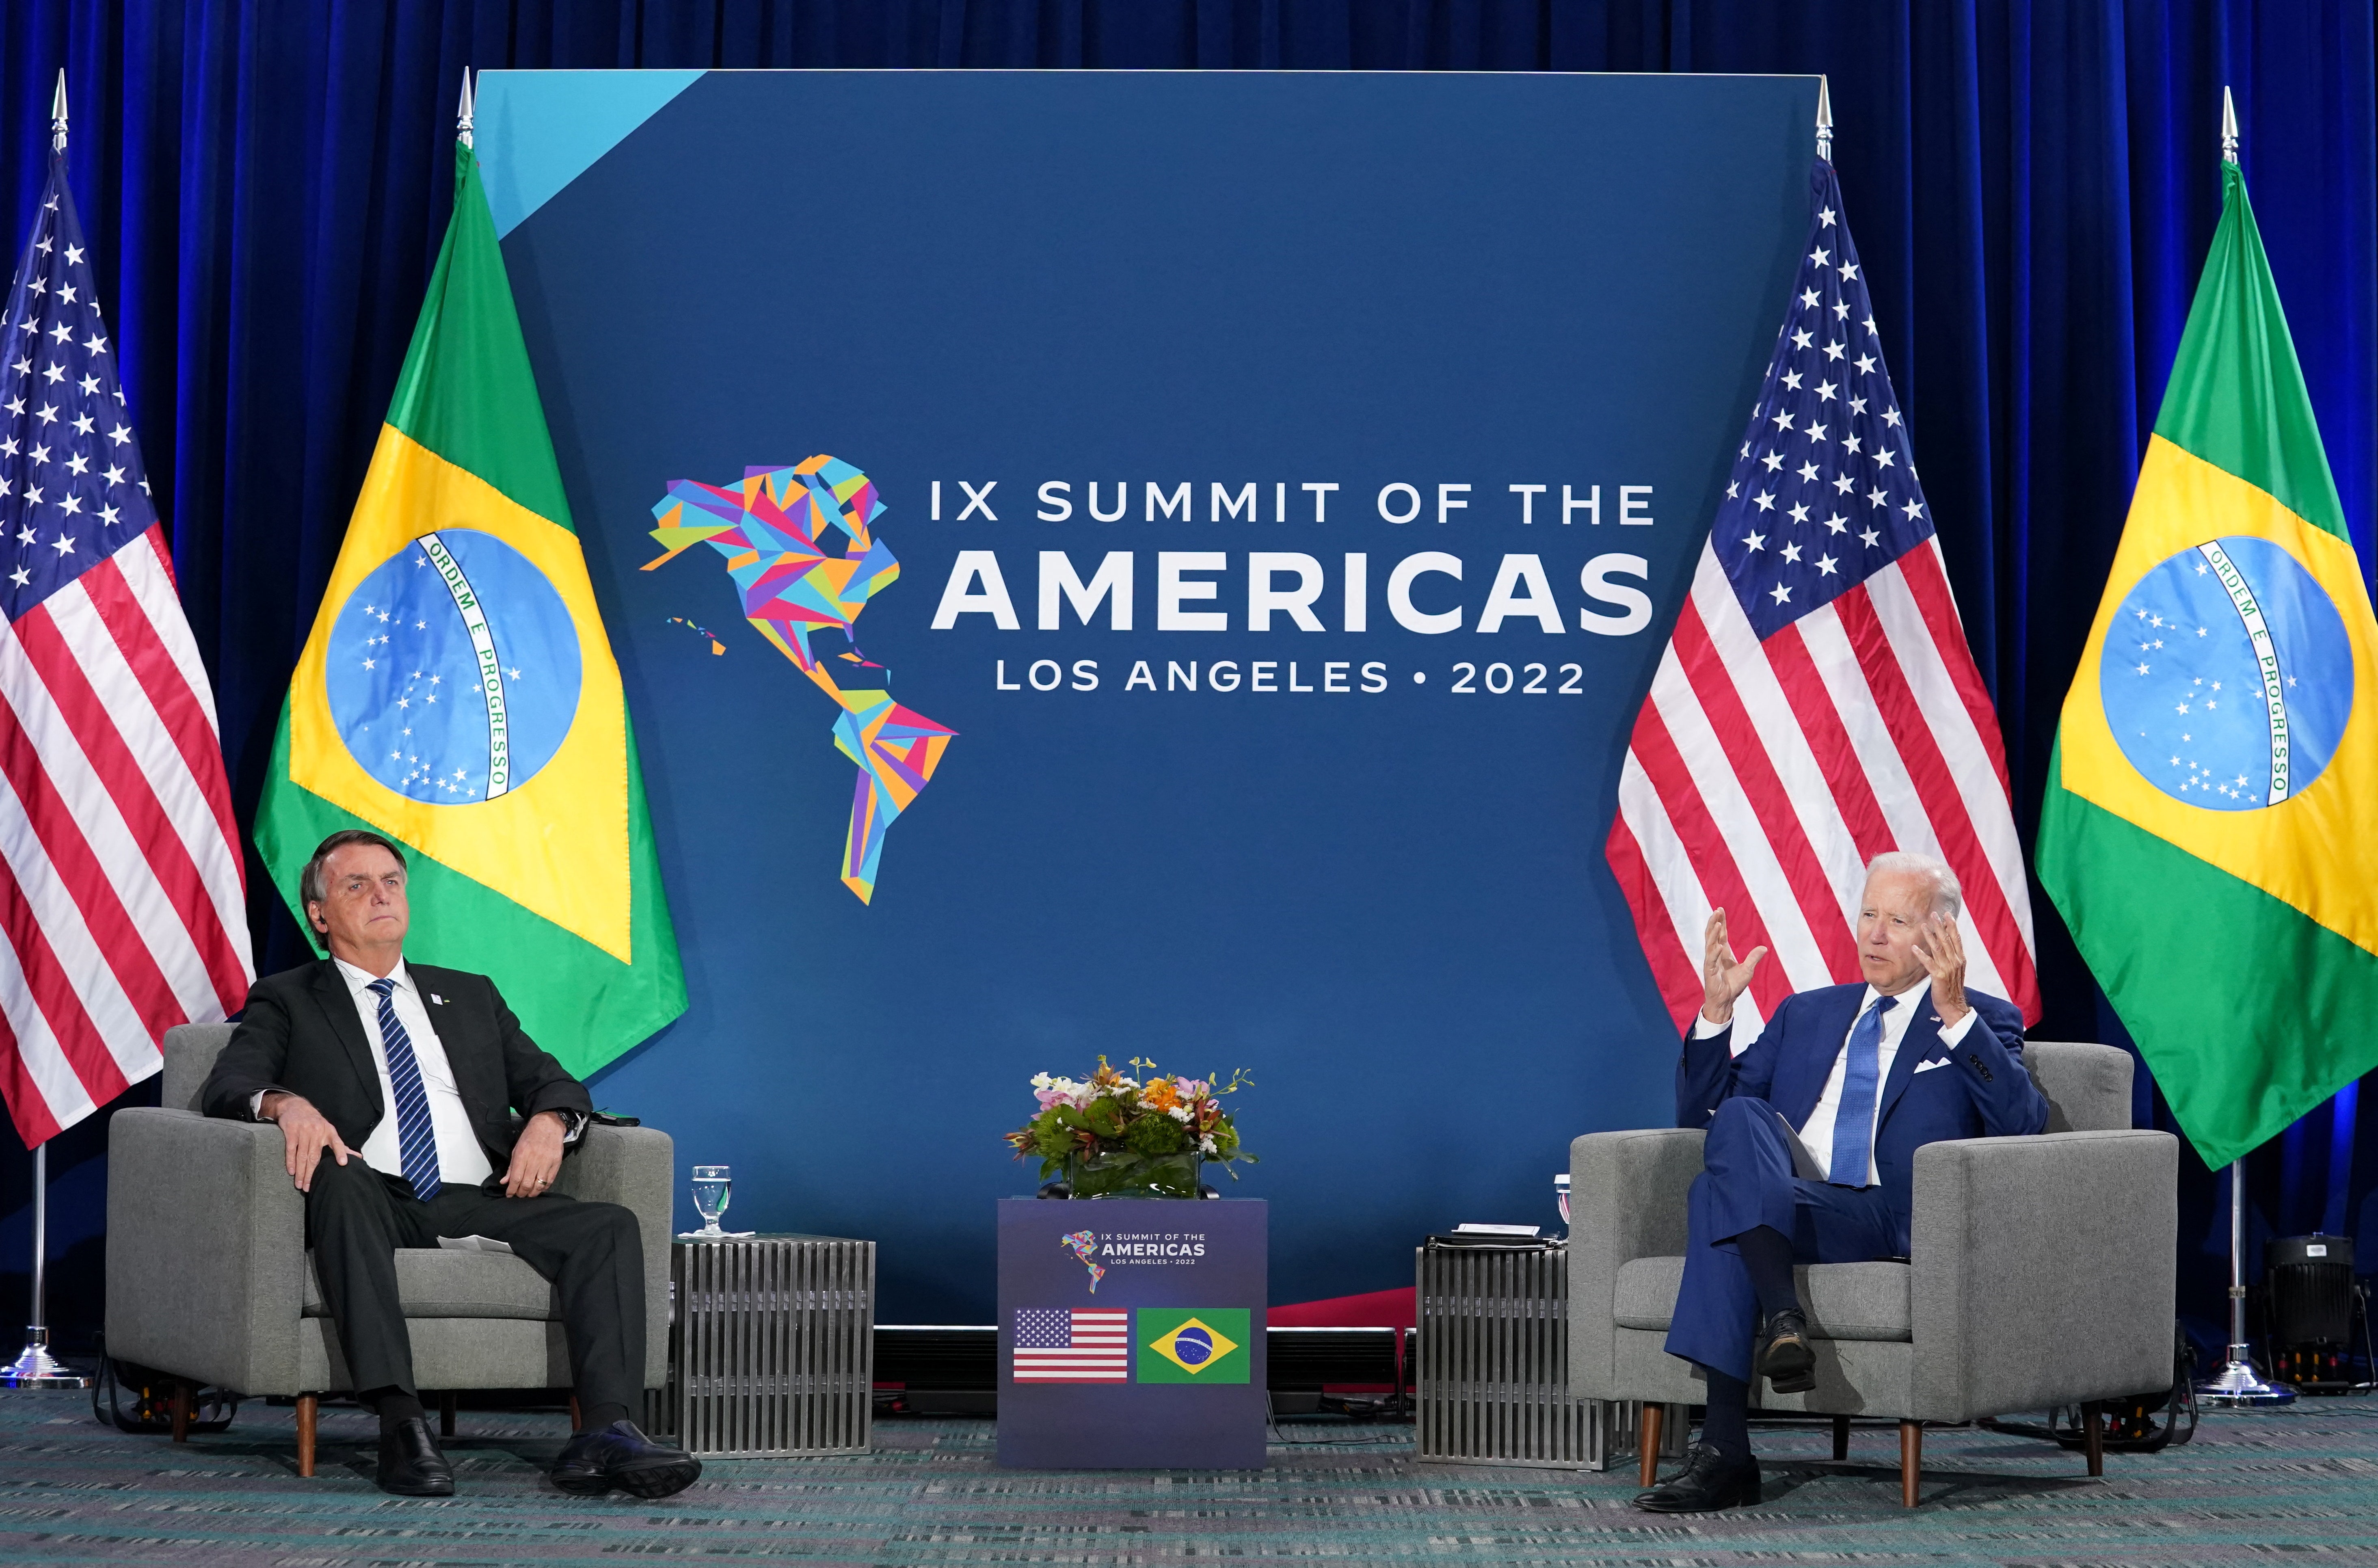 Bolsonaro touts the world's dependance on Brazil for 'its very survival,' has 'solution' to global crises